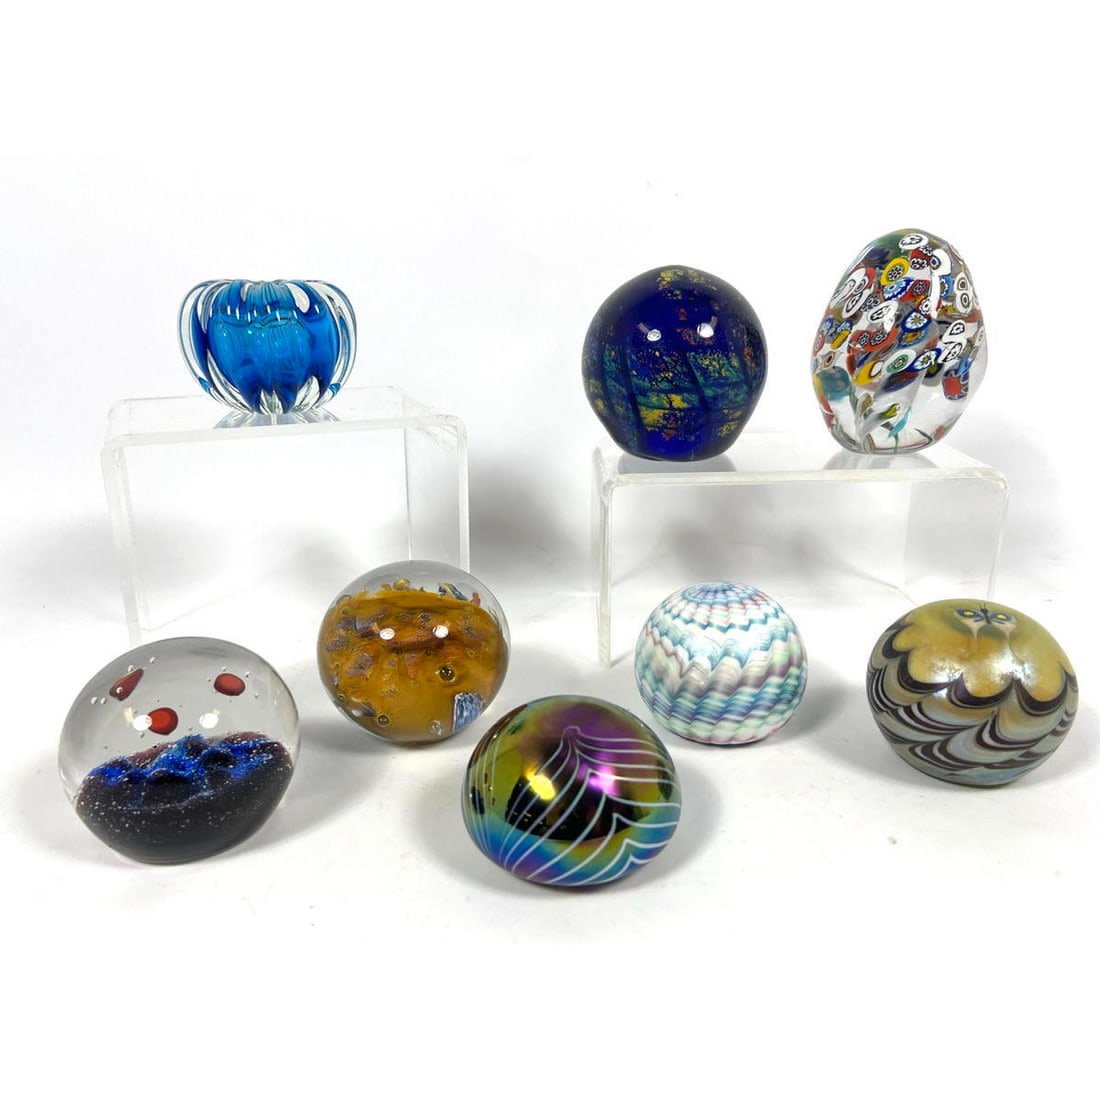 8 Art glass paper weights. Many